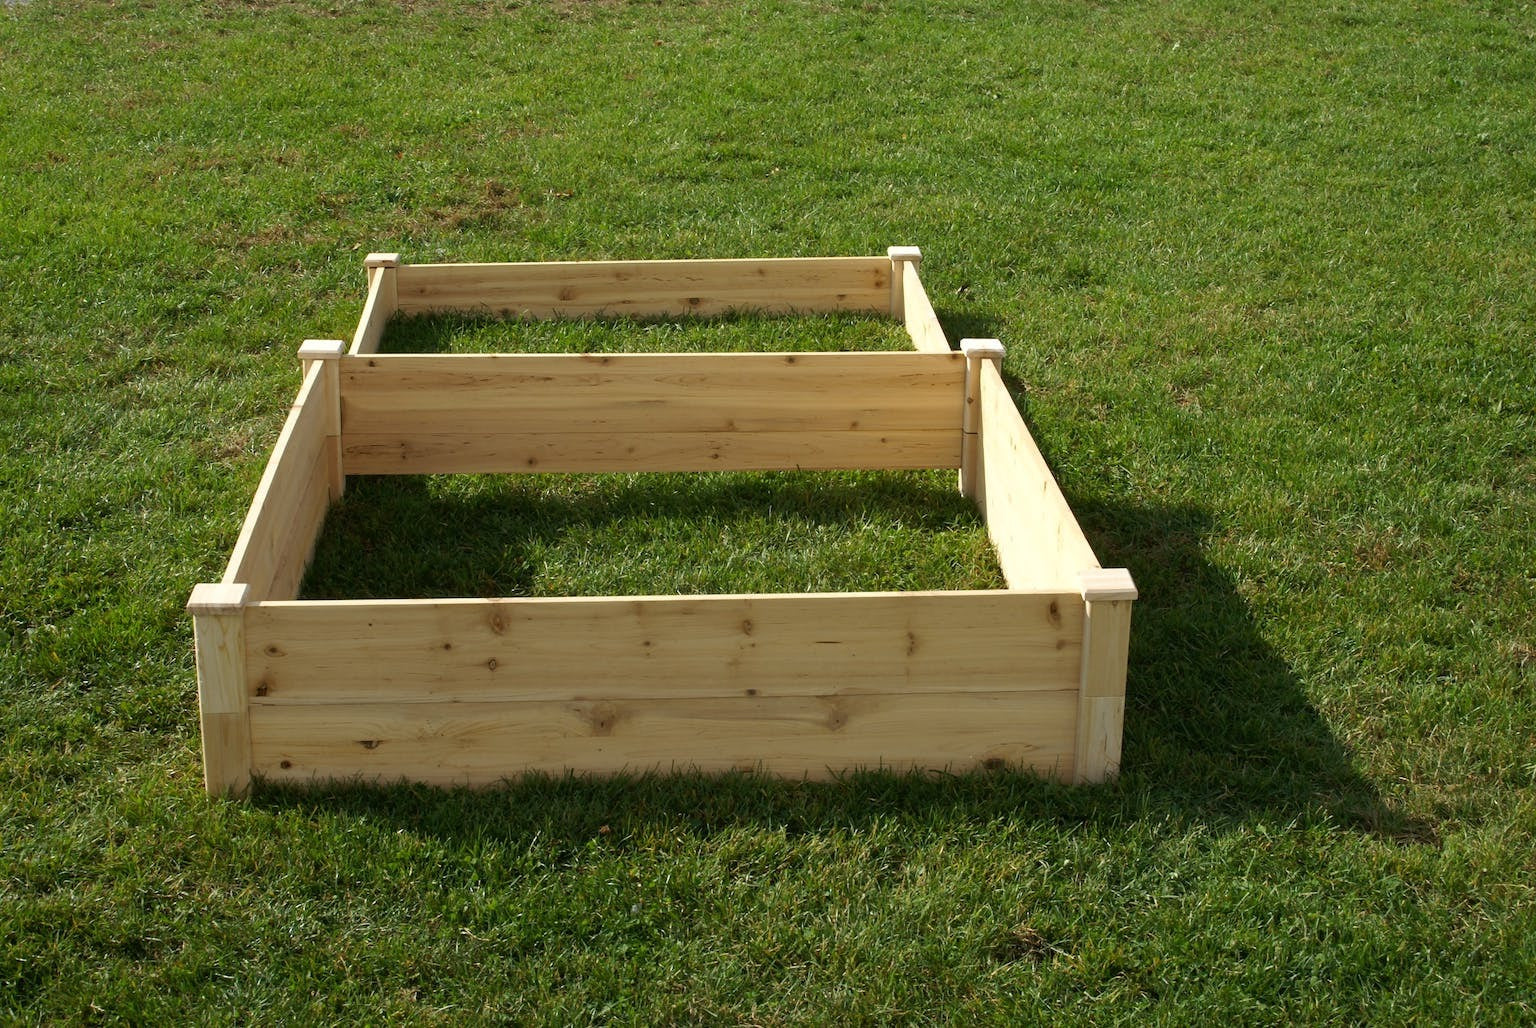 Raised Garden Bed (4FT X 8FT X 5.5-11IN) - Green Thumb Depot